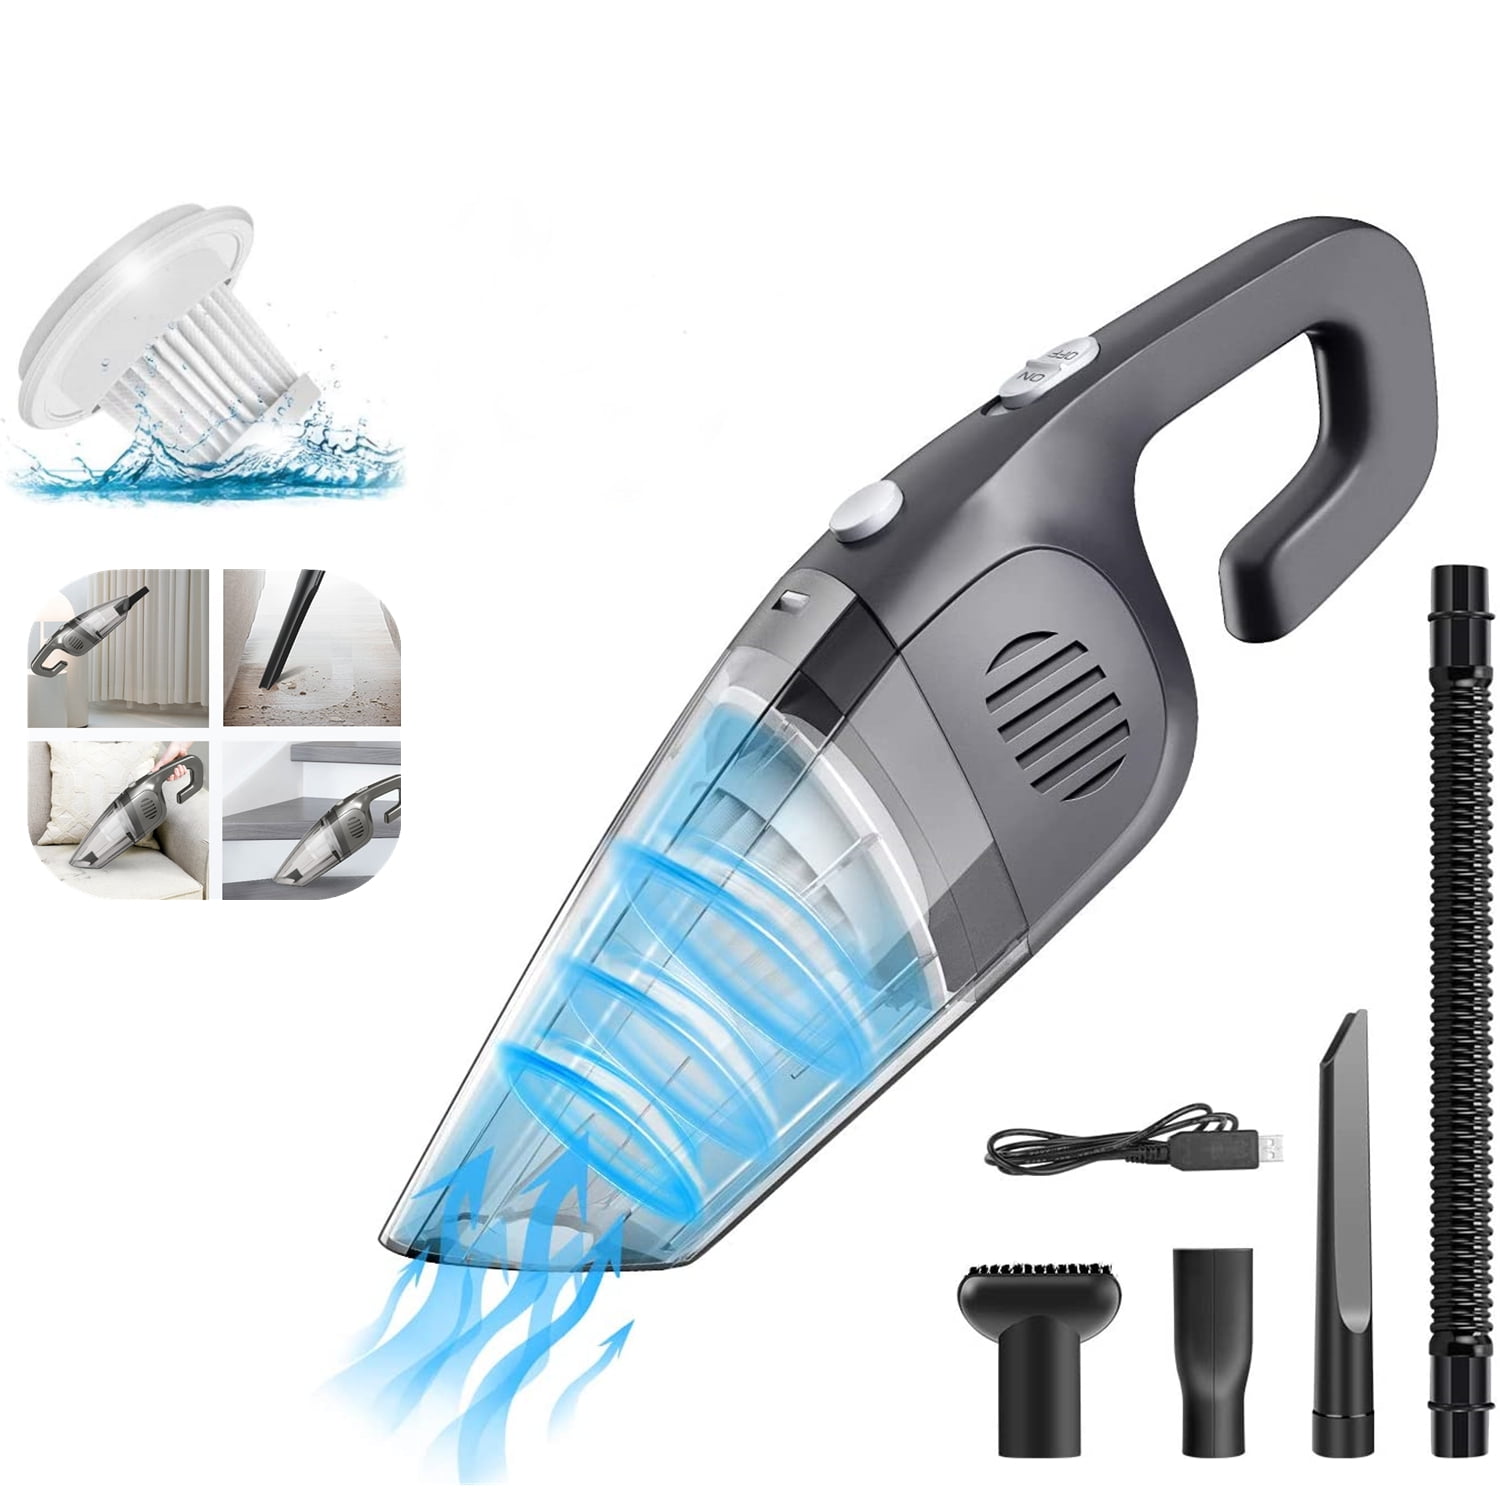 Cordless Car Vacuum Cleaner Handheld Home Rechargeable Wet & Dry Duster Portable 